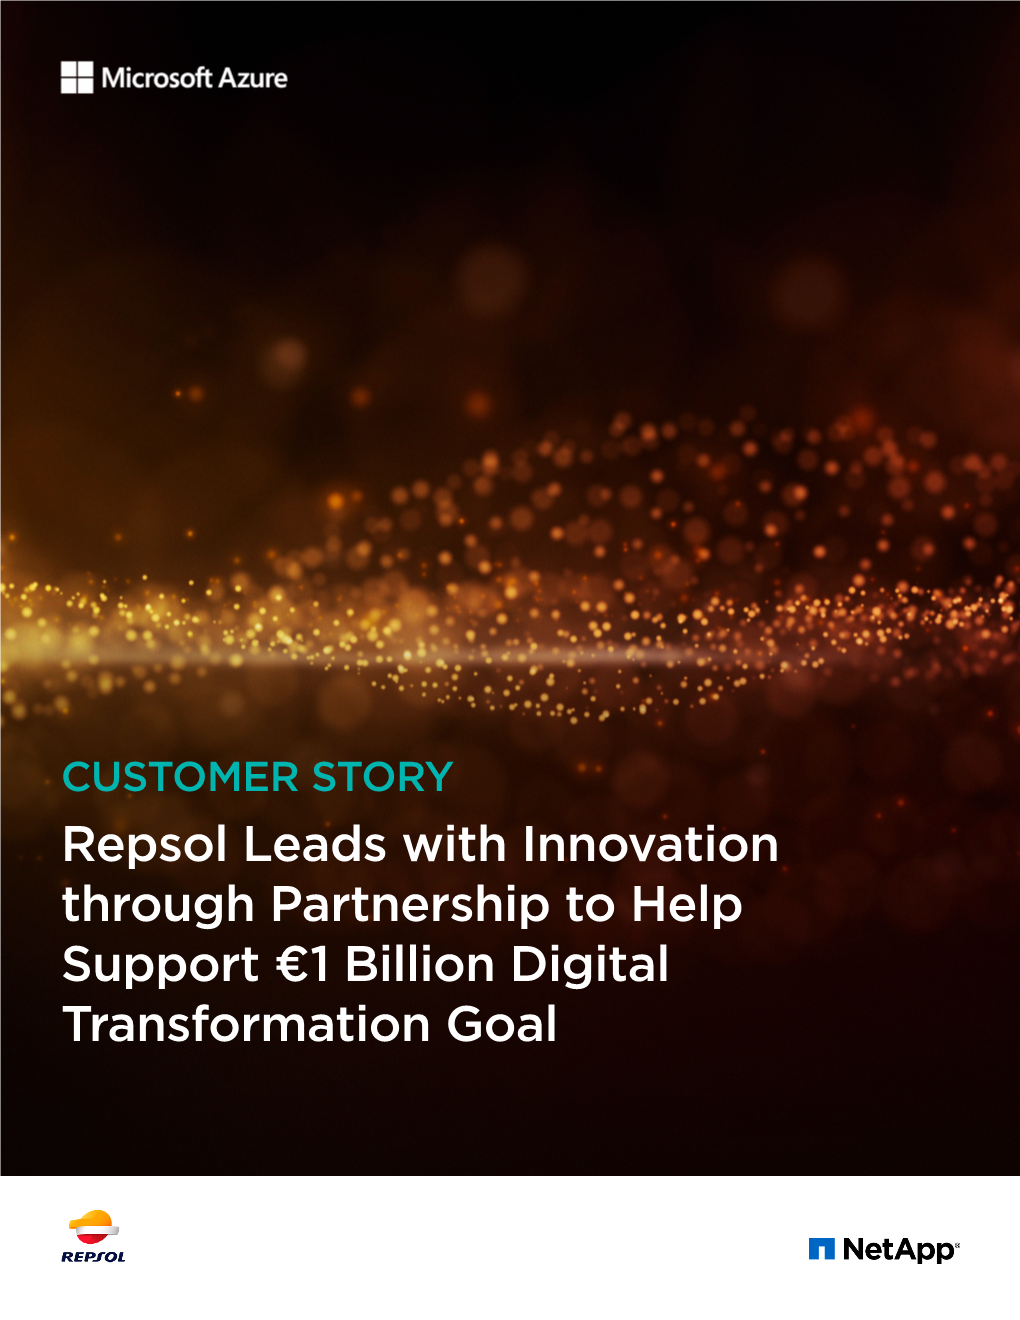 Repsol Leads with Innovation Through Partnership to Help Support €1